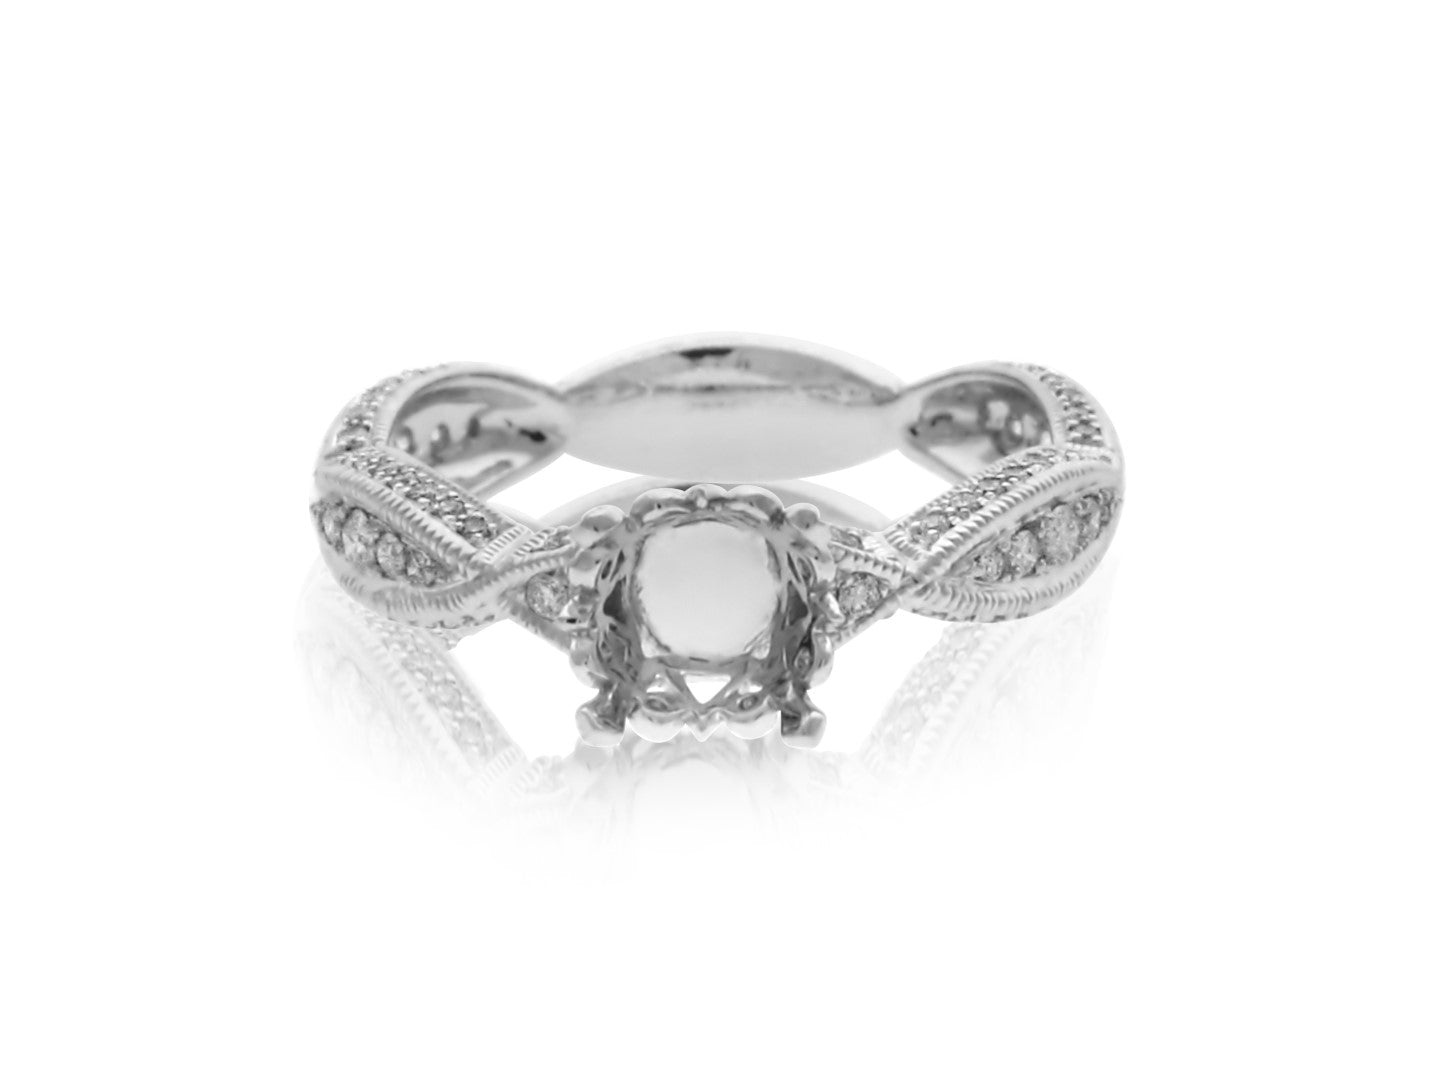 BEVERLEY K 18K WHITE GOLD 0.41CT DIAMOND ENGAGEMENT RING MOUNTING (CENTER STONE SOLD SEPARATELY) FROM THE BRIDAL JEWELRY COLLECTION